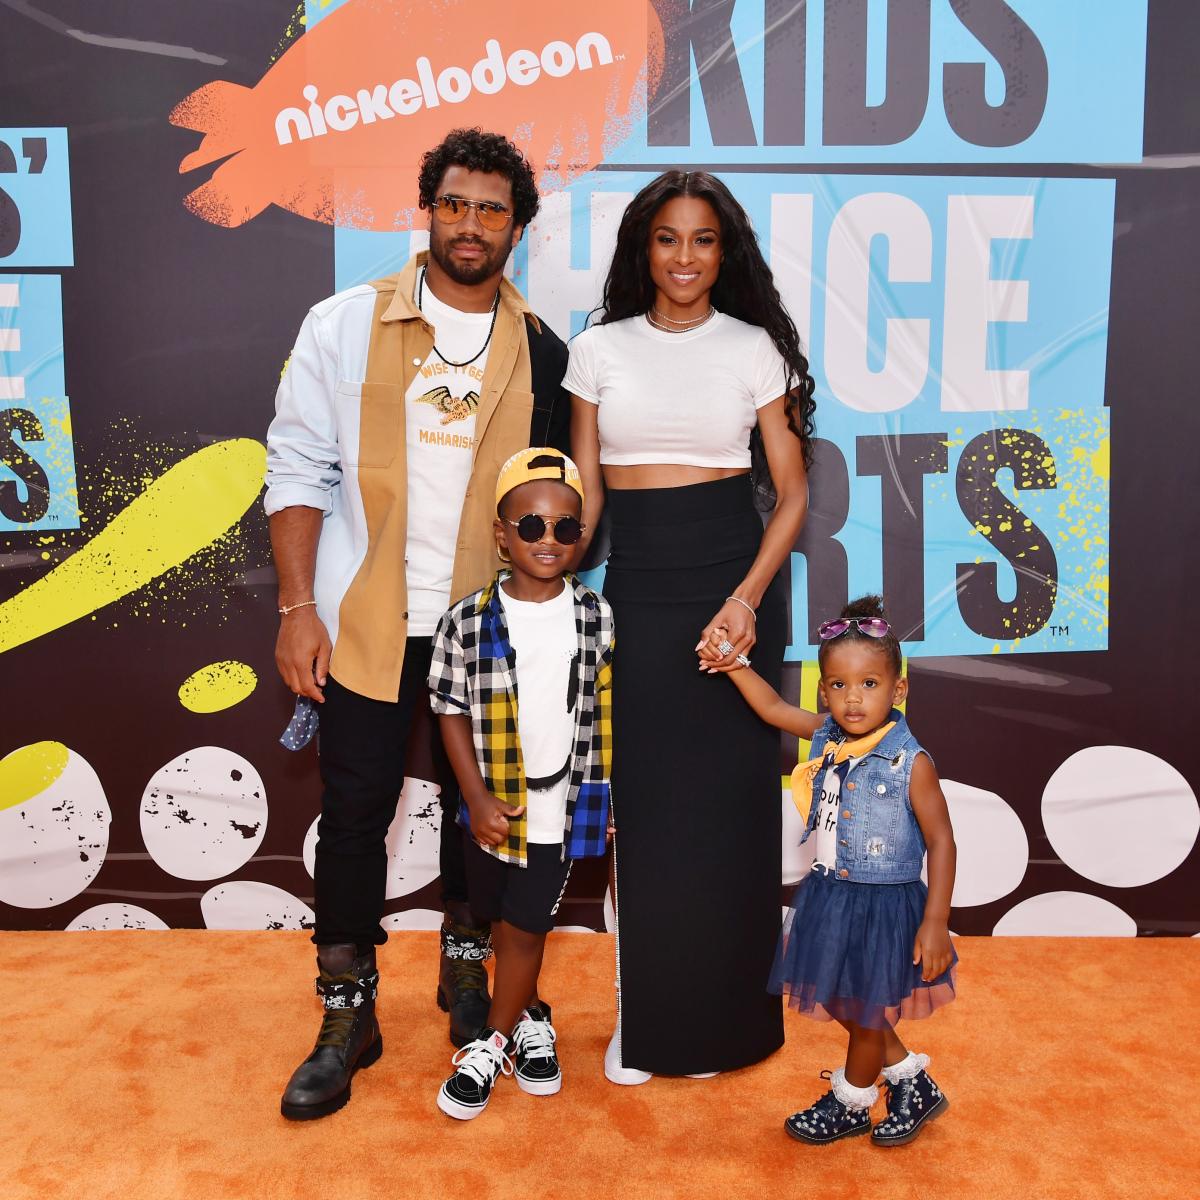 Ciara and kids kitted out in team gear as they root for Russell Wilson's  Seahawks against Falcons